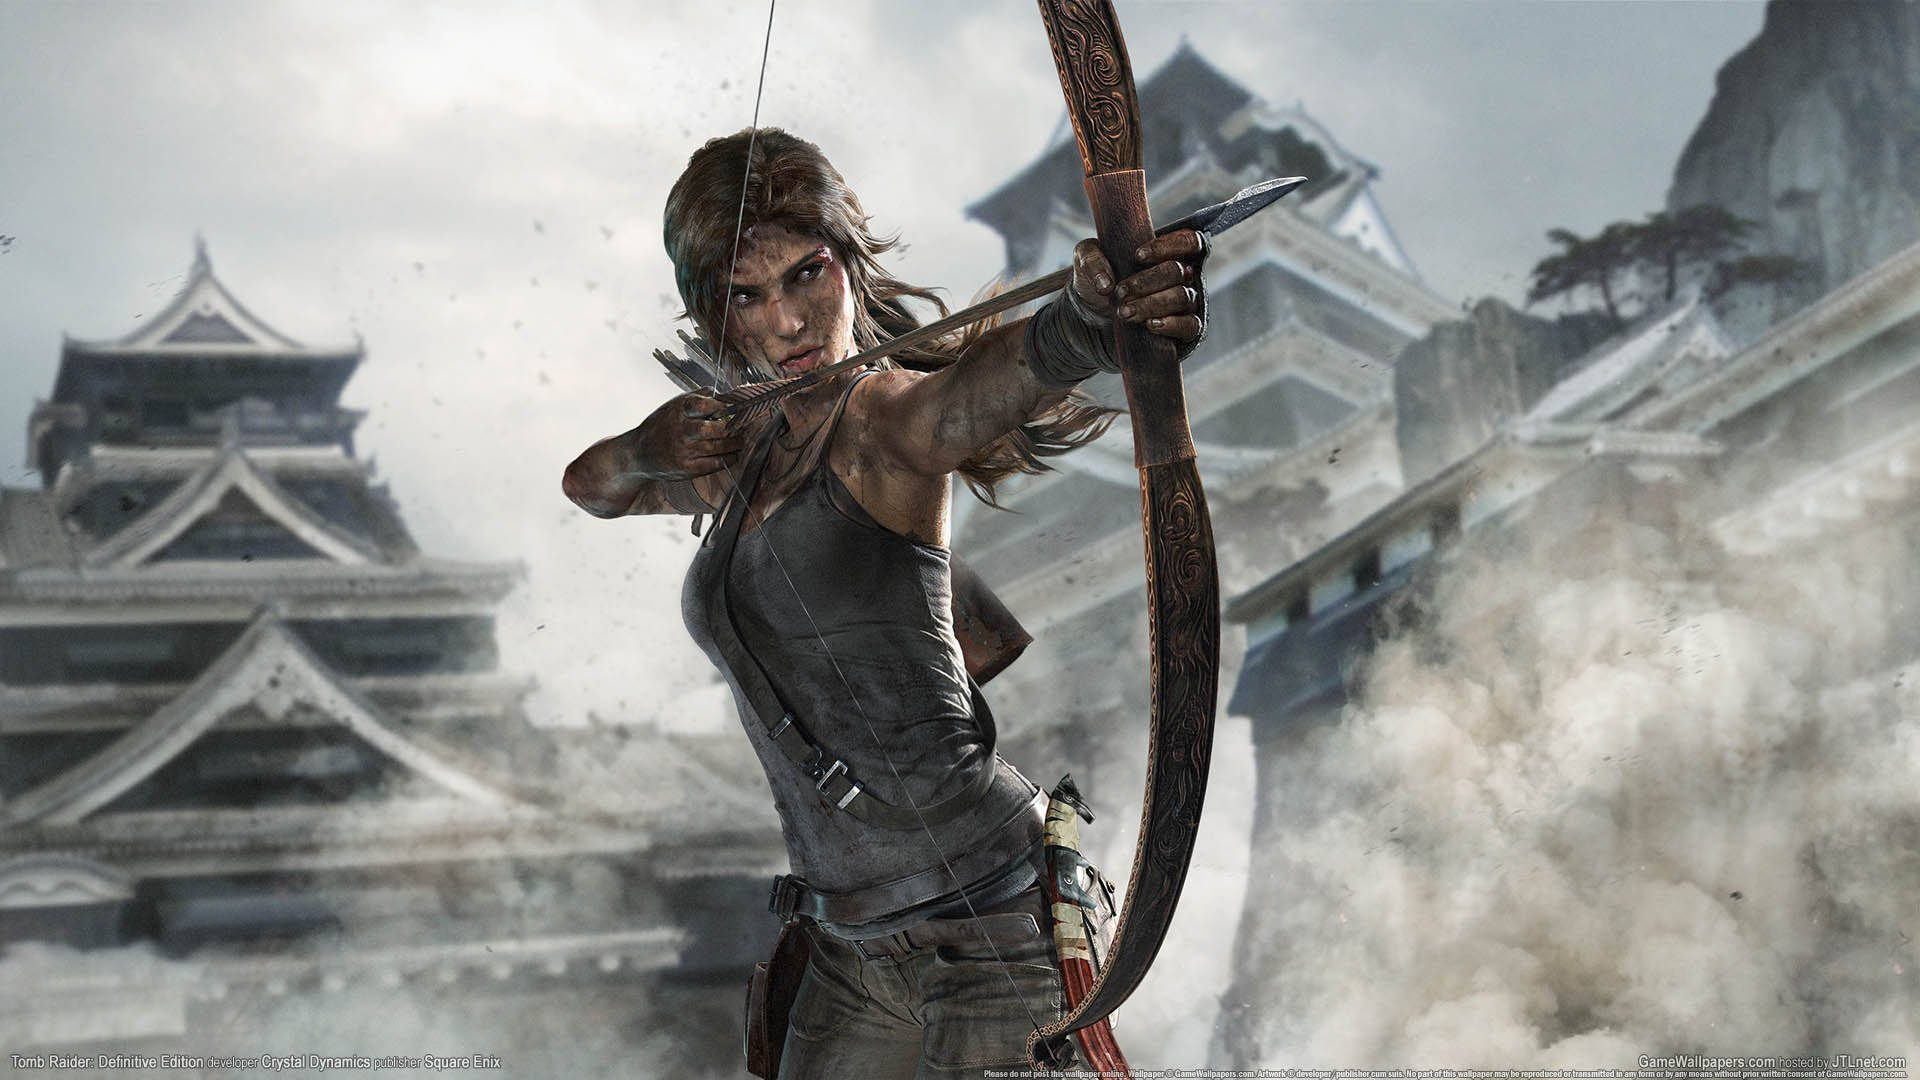 Lara Croft In Action In The Tomb Raider Game Wallpaper